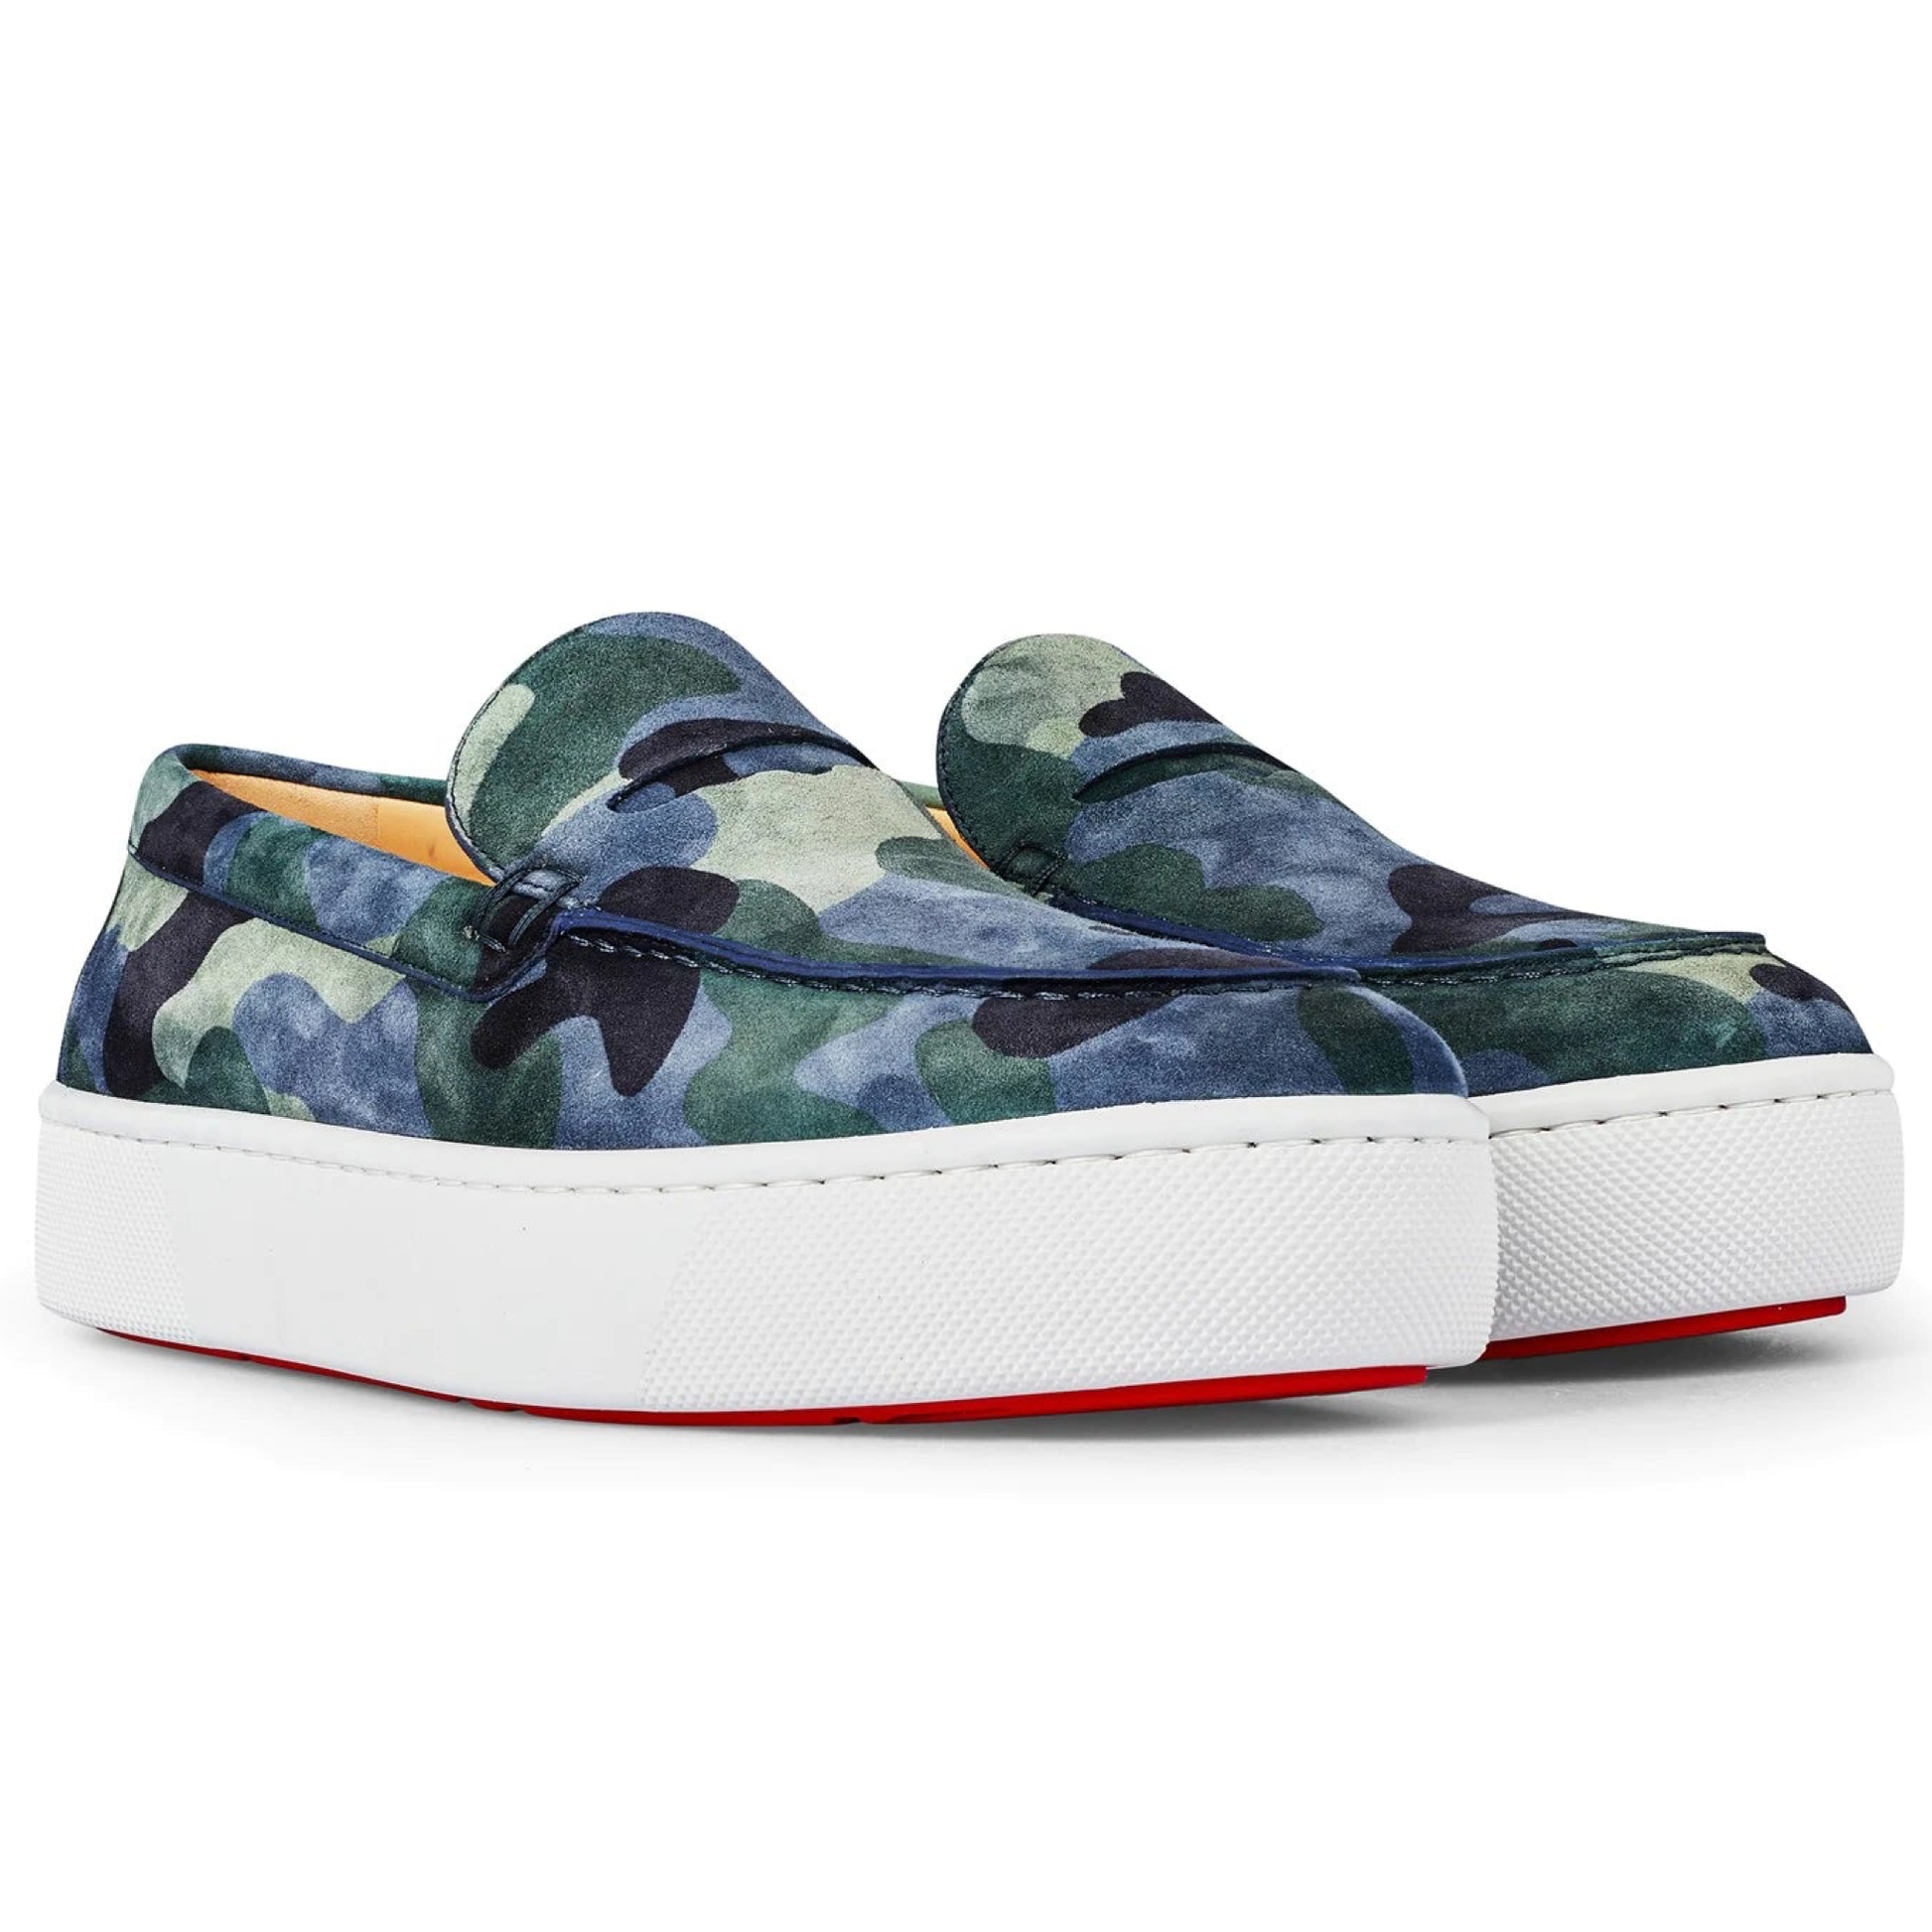  Christian Louboutin Paqueboat Blue and Green Camouflage Suede  Sneakers (us_Footwear_Size_System, Adult, Men, Numeric, Medium, Numeric_6)  : Clothing, Shoes & Jewelry